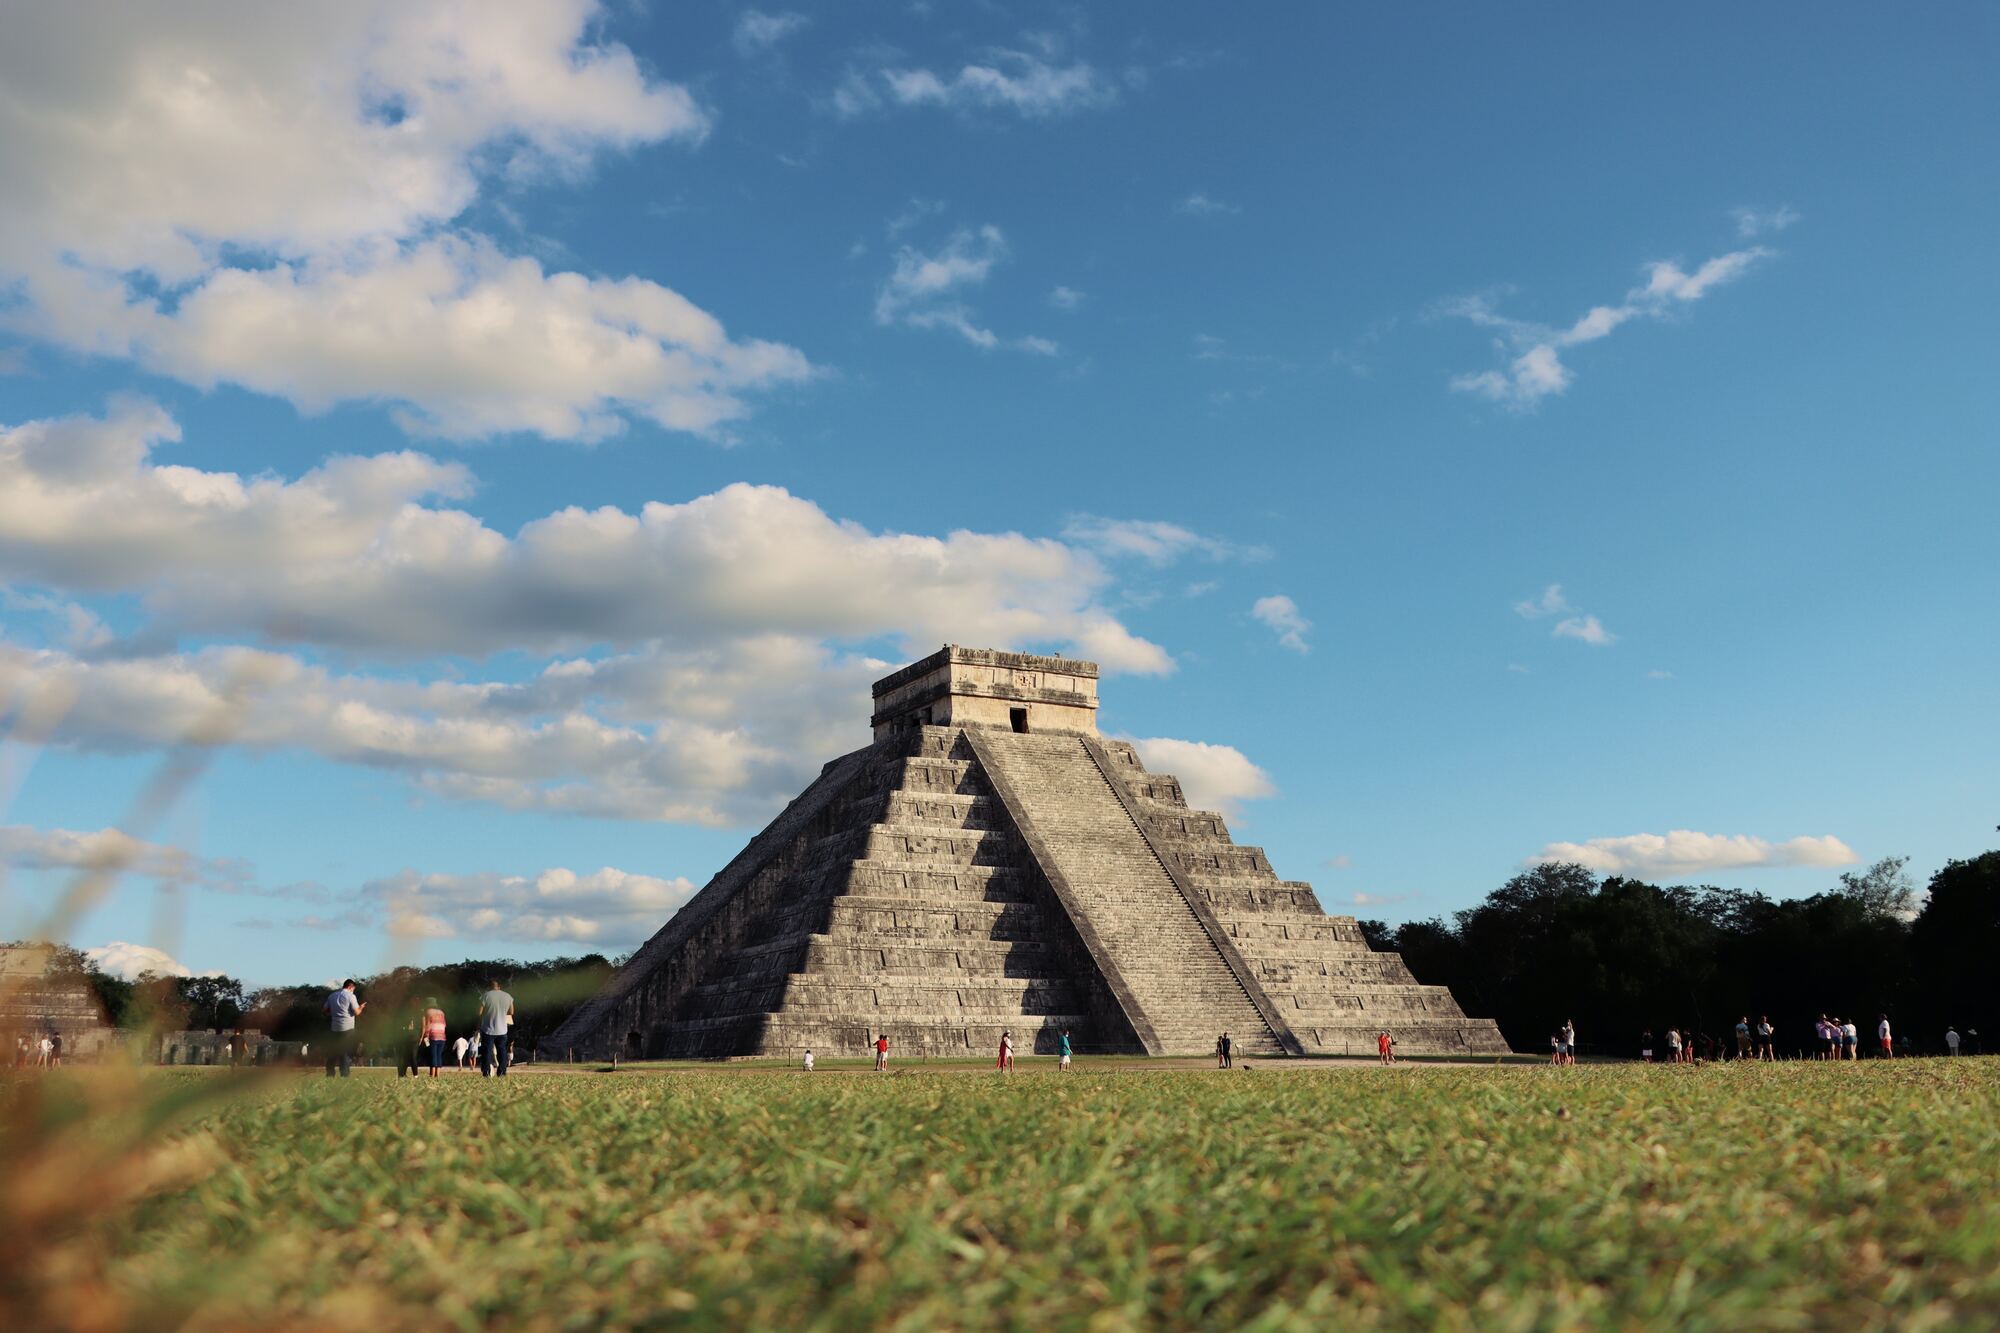 Mysteries of the Indian pyramid Chichén Itzá that still shock mankind today: what is special about it